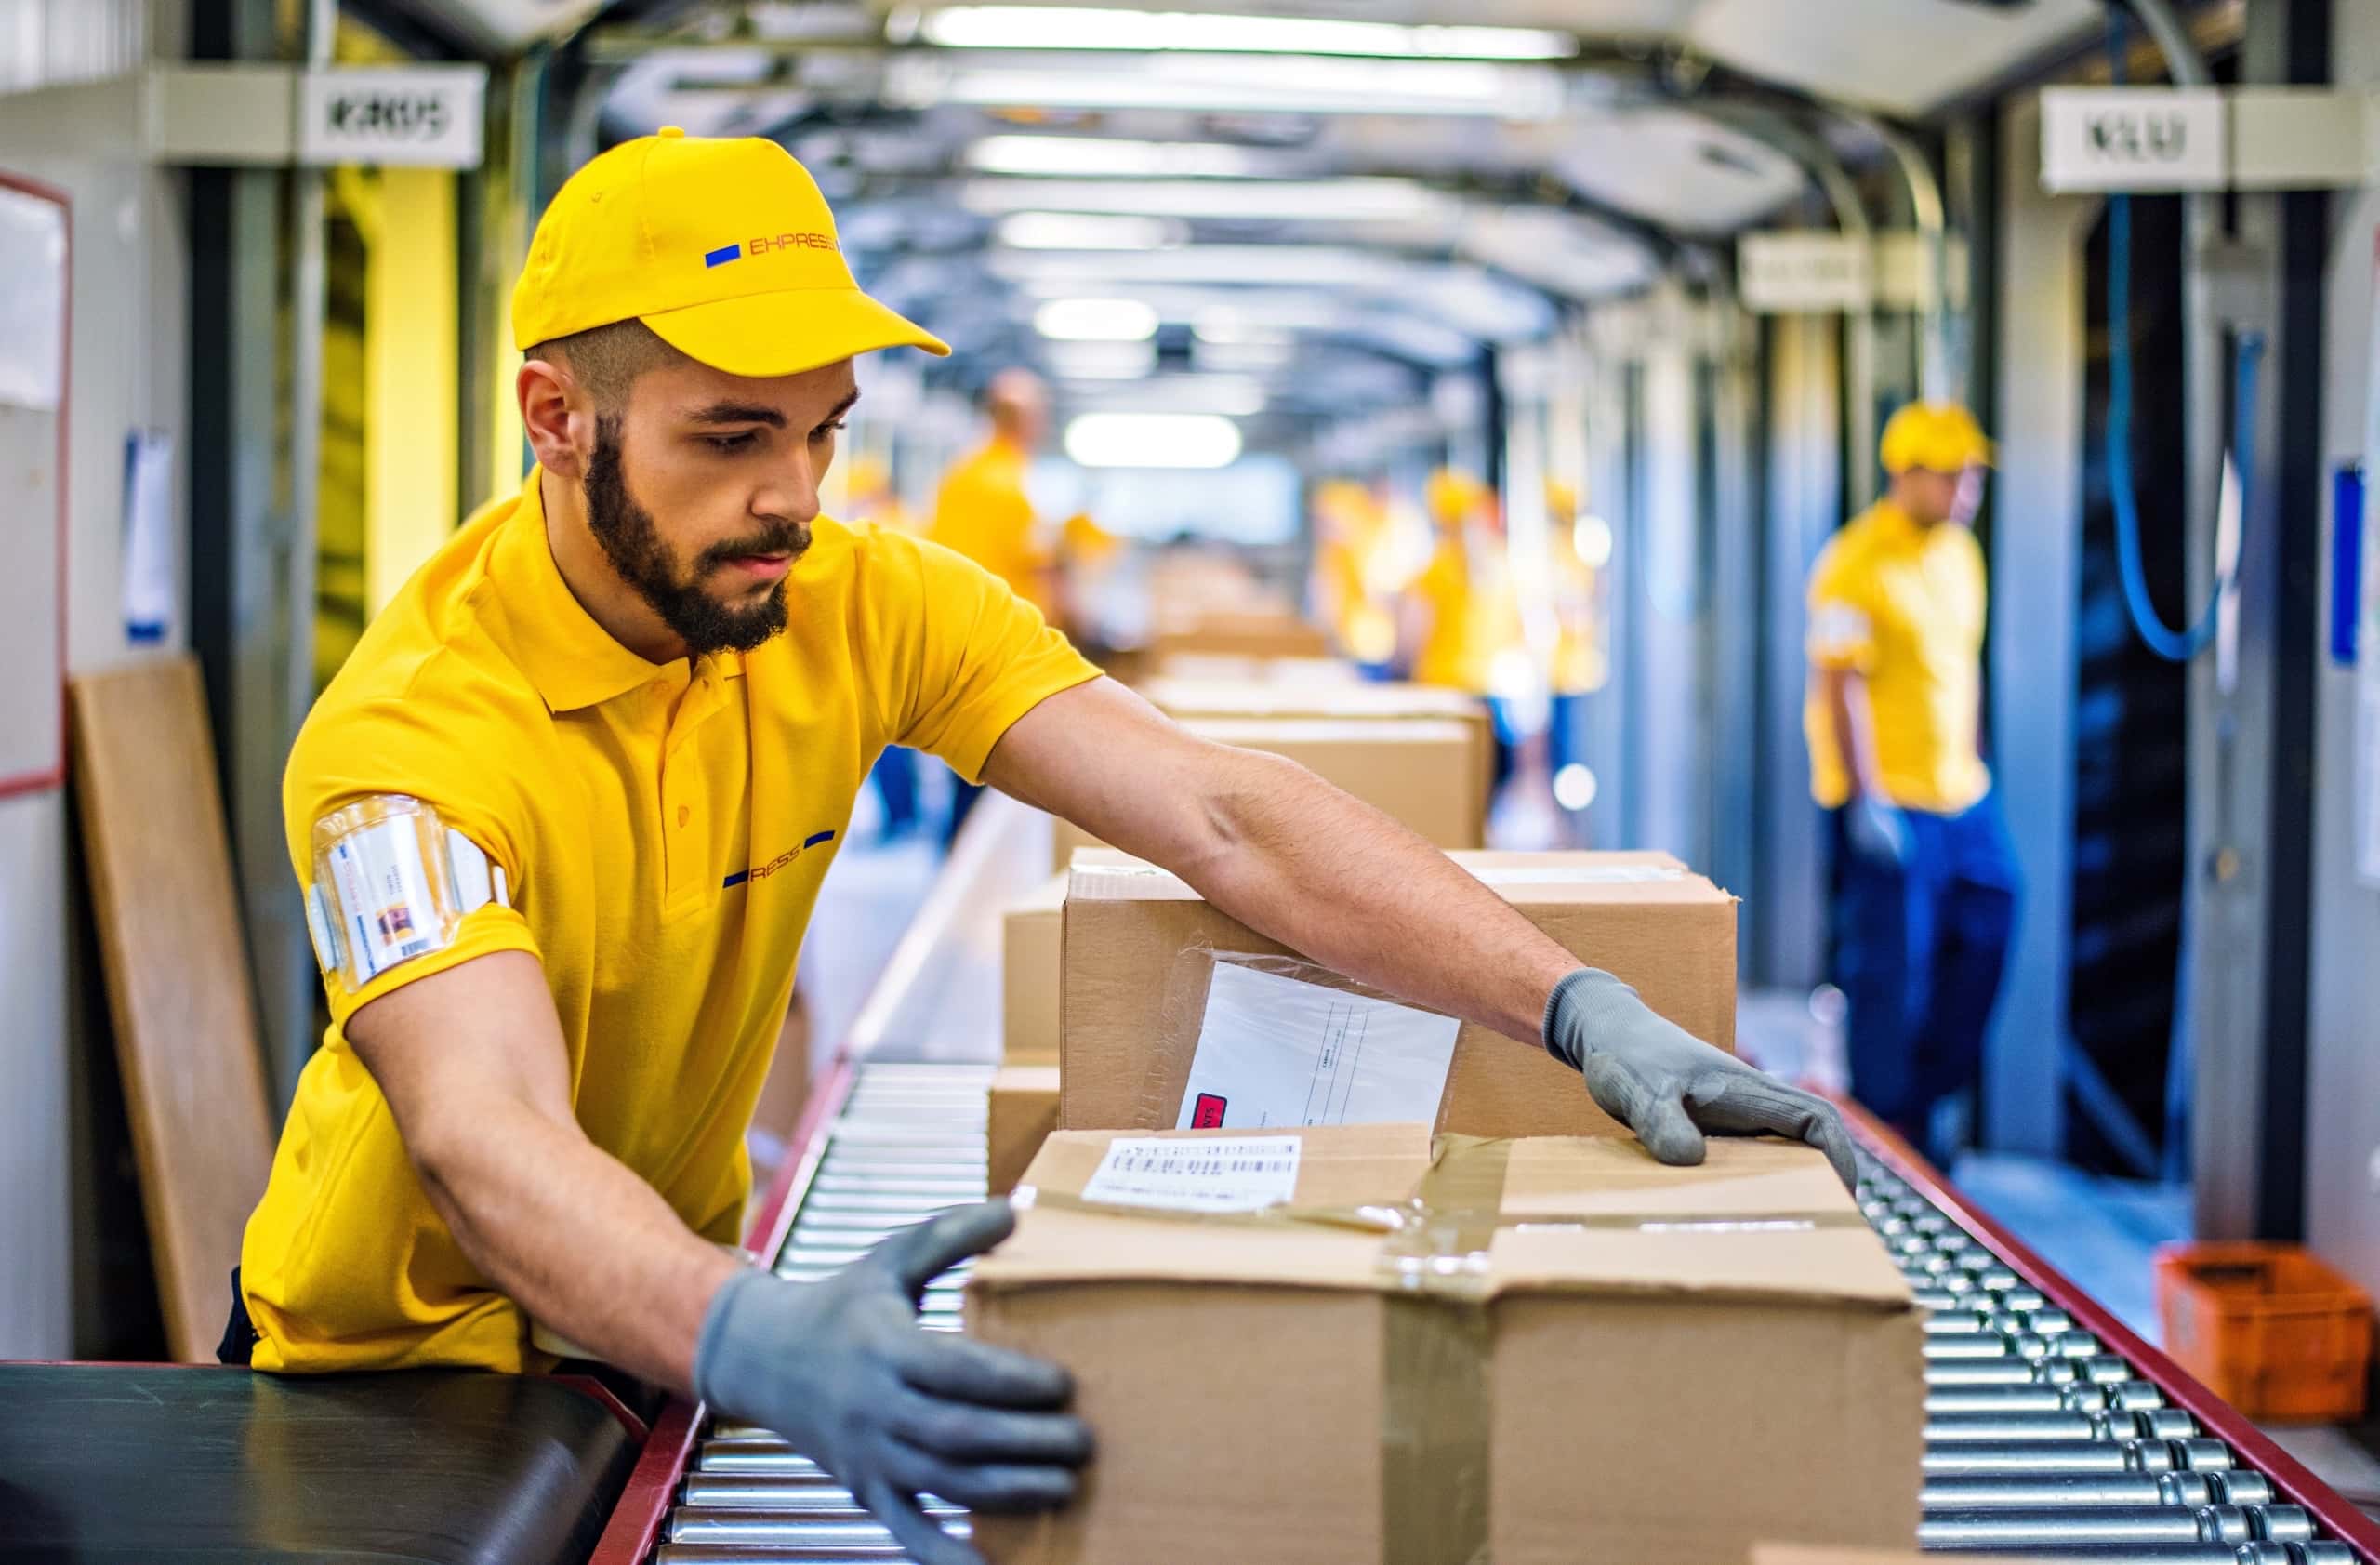 A worker in a yellow uniform is pushing a box along a conveyor belt in a warehouse, representing the tailored IT solutions offered by Fast Fixx for the logistics industry